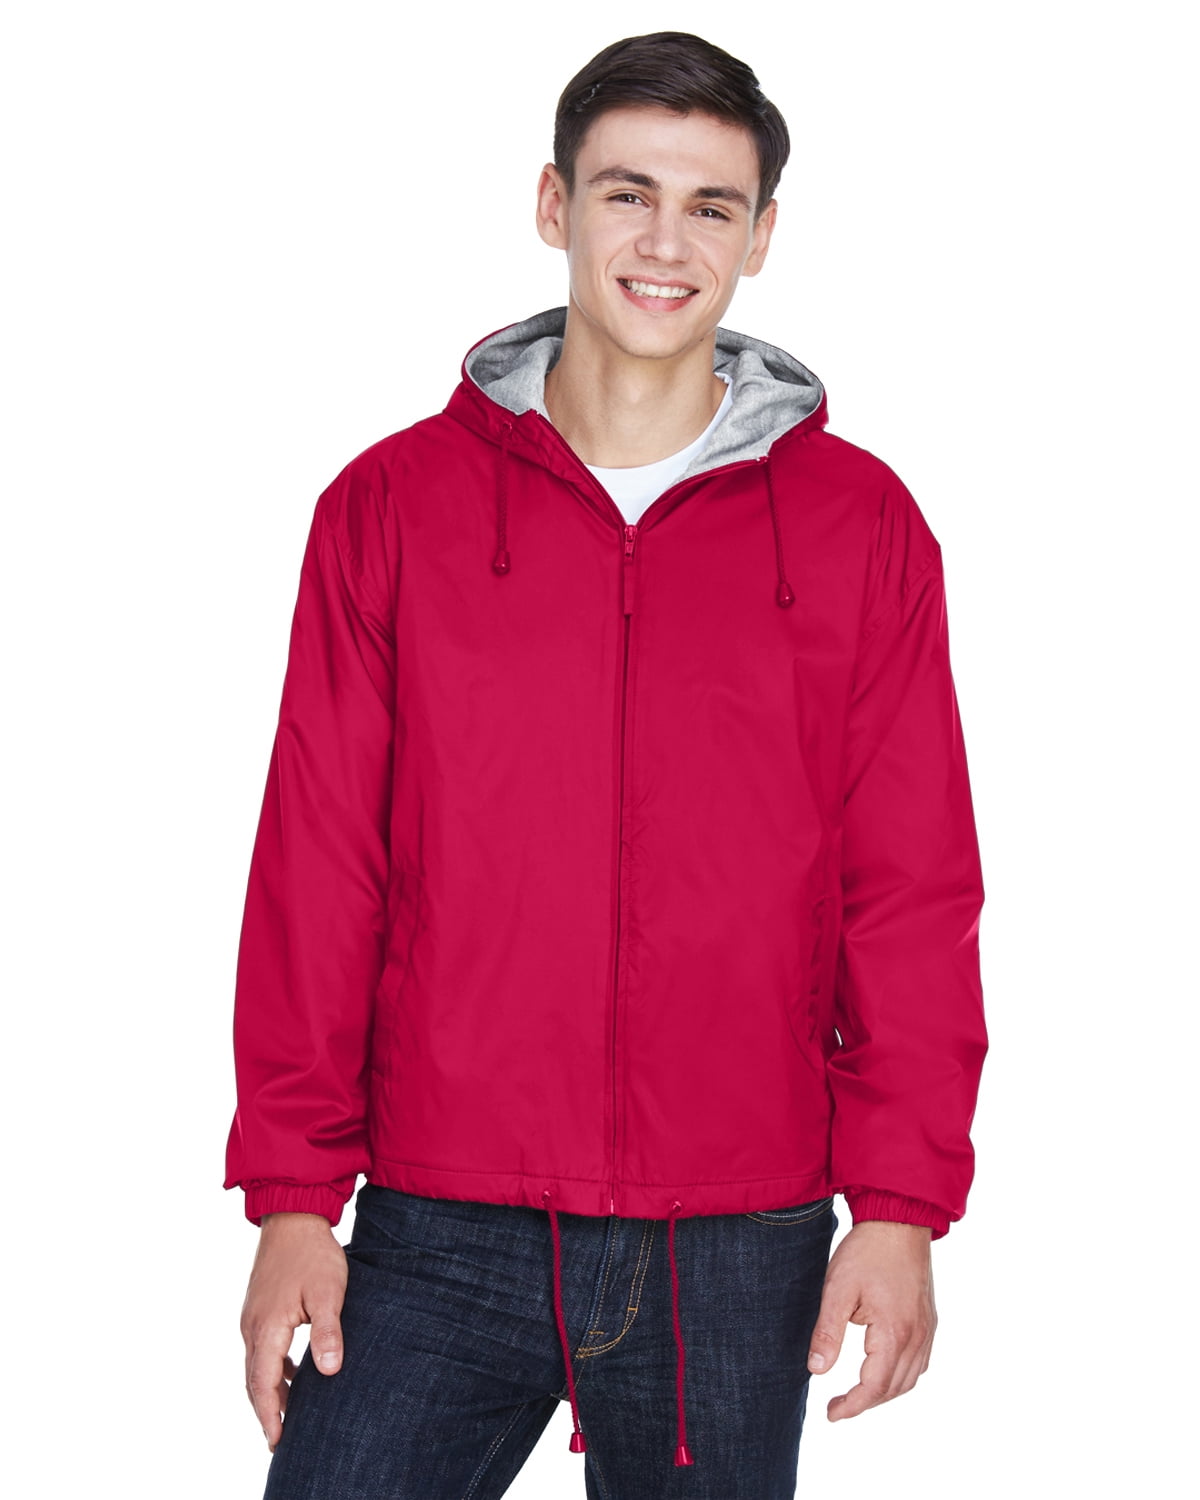 UltraClub - The UltraClub Adult Fleece-Lined Hooded Jacket - RED - XL ...